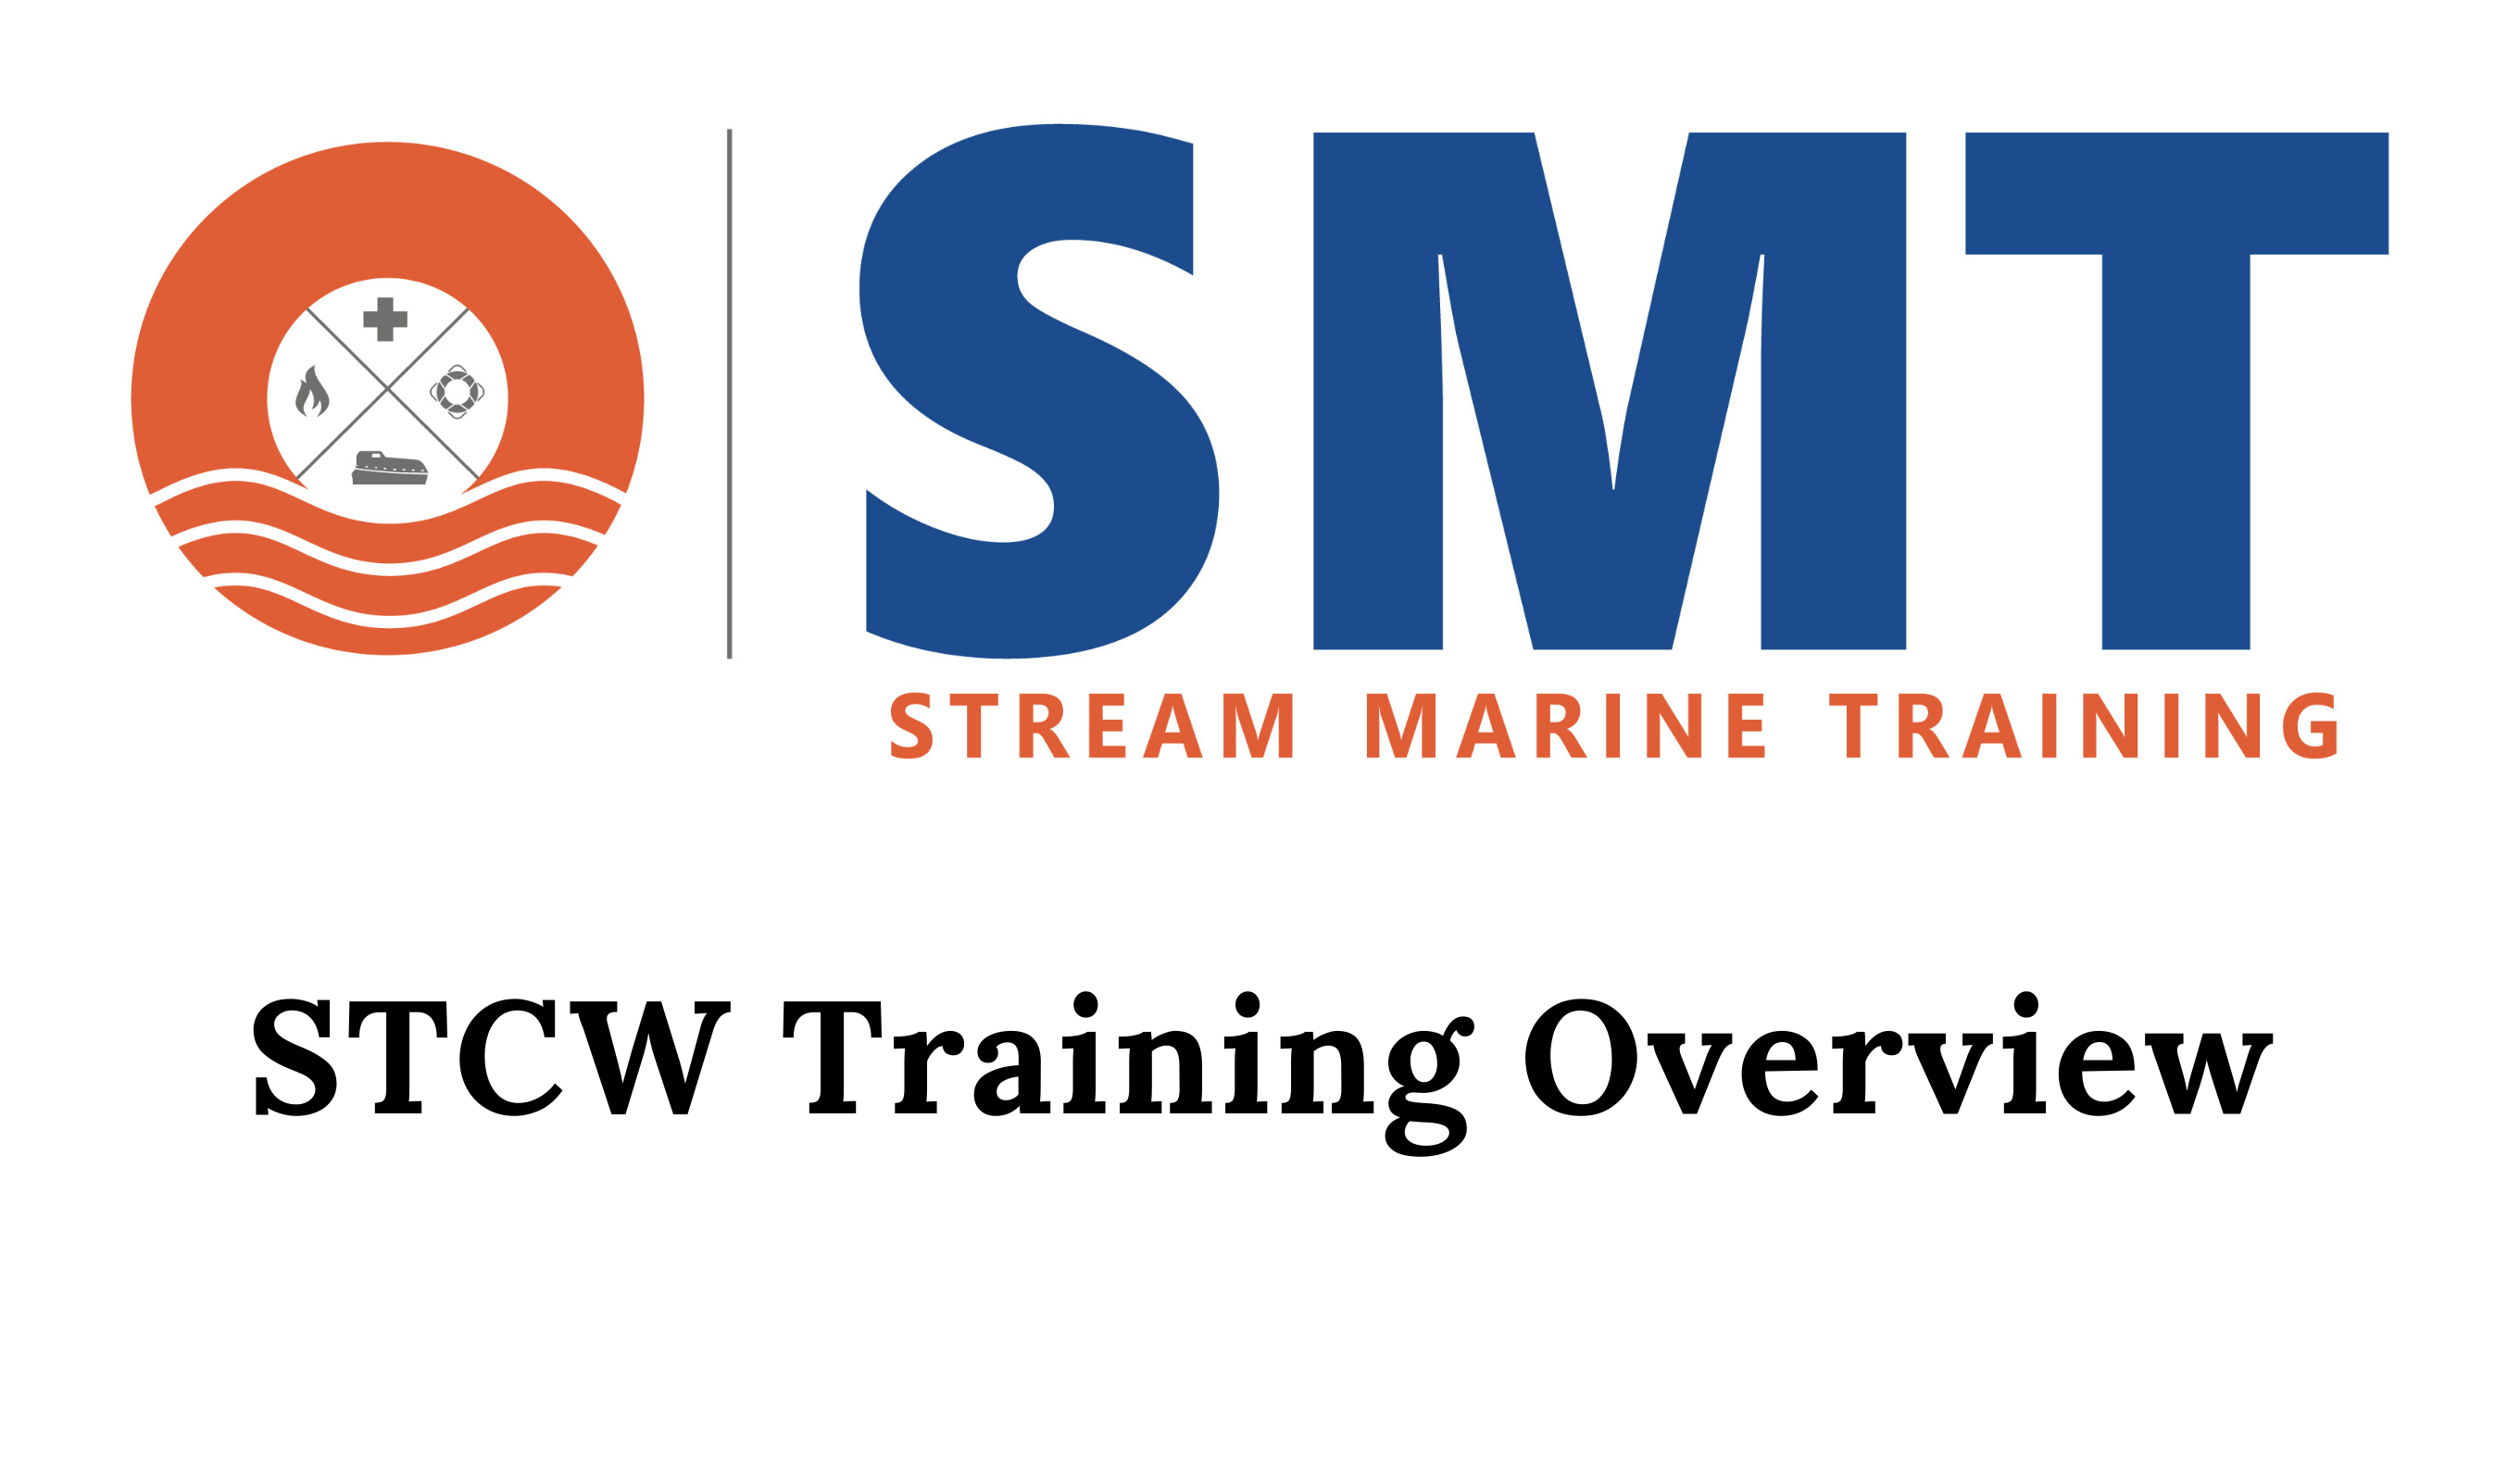 STCW Overview